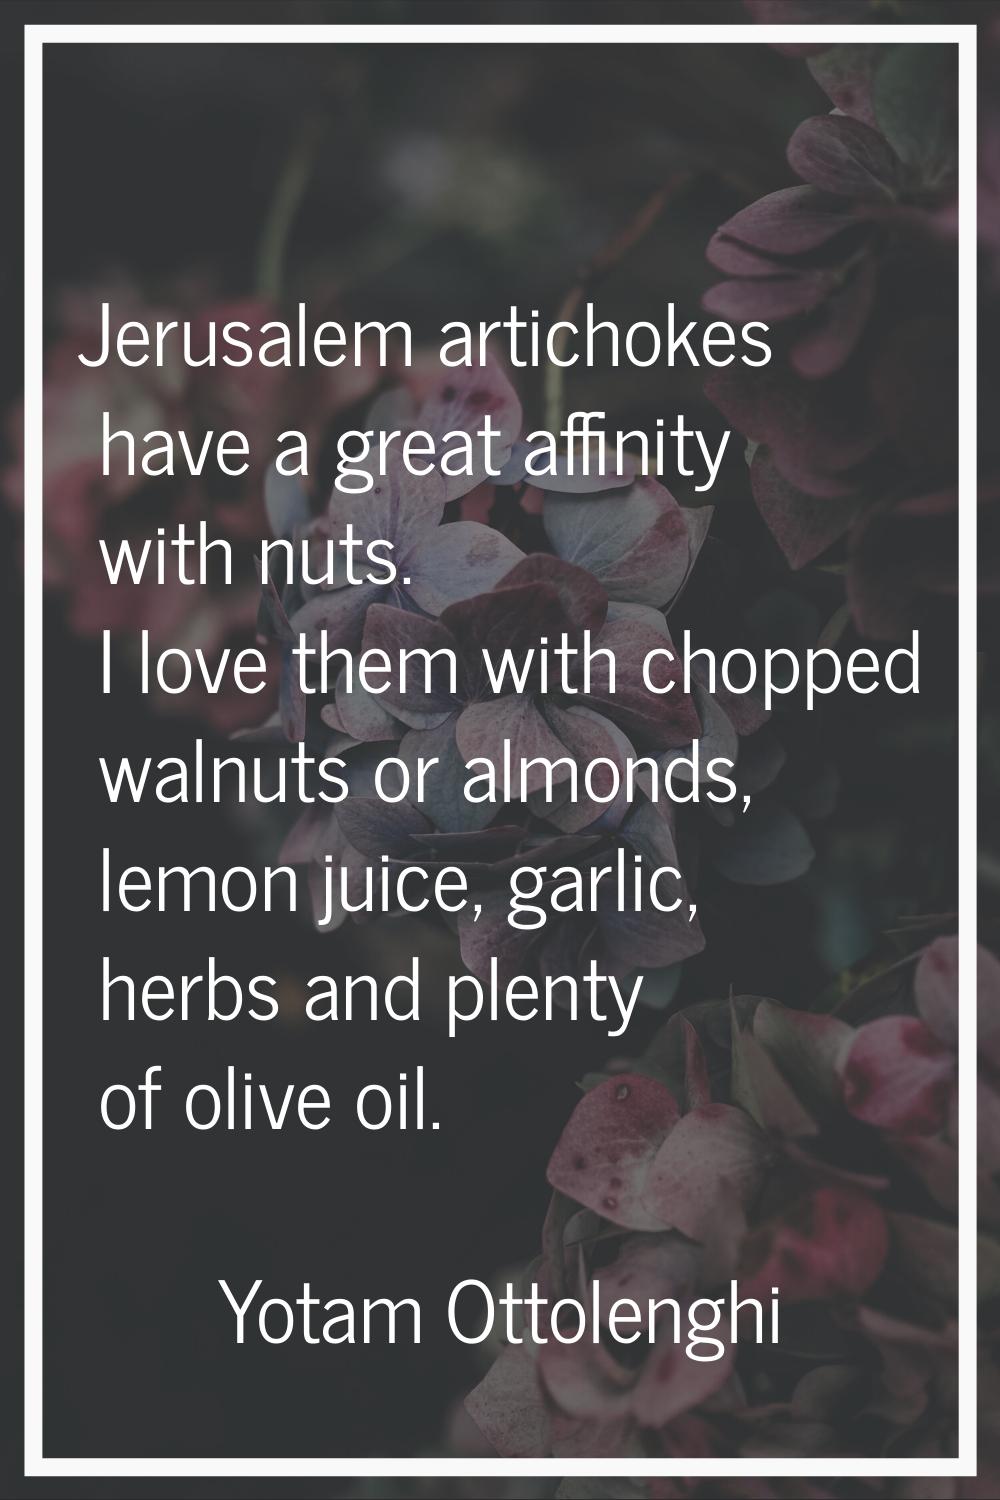 Jerusalem artichokes have a great affinity with nuts. I love them with chopped walnuts or almonds, 